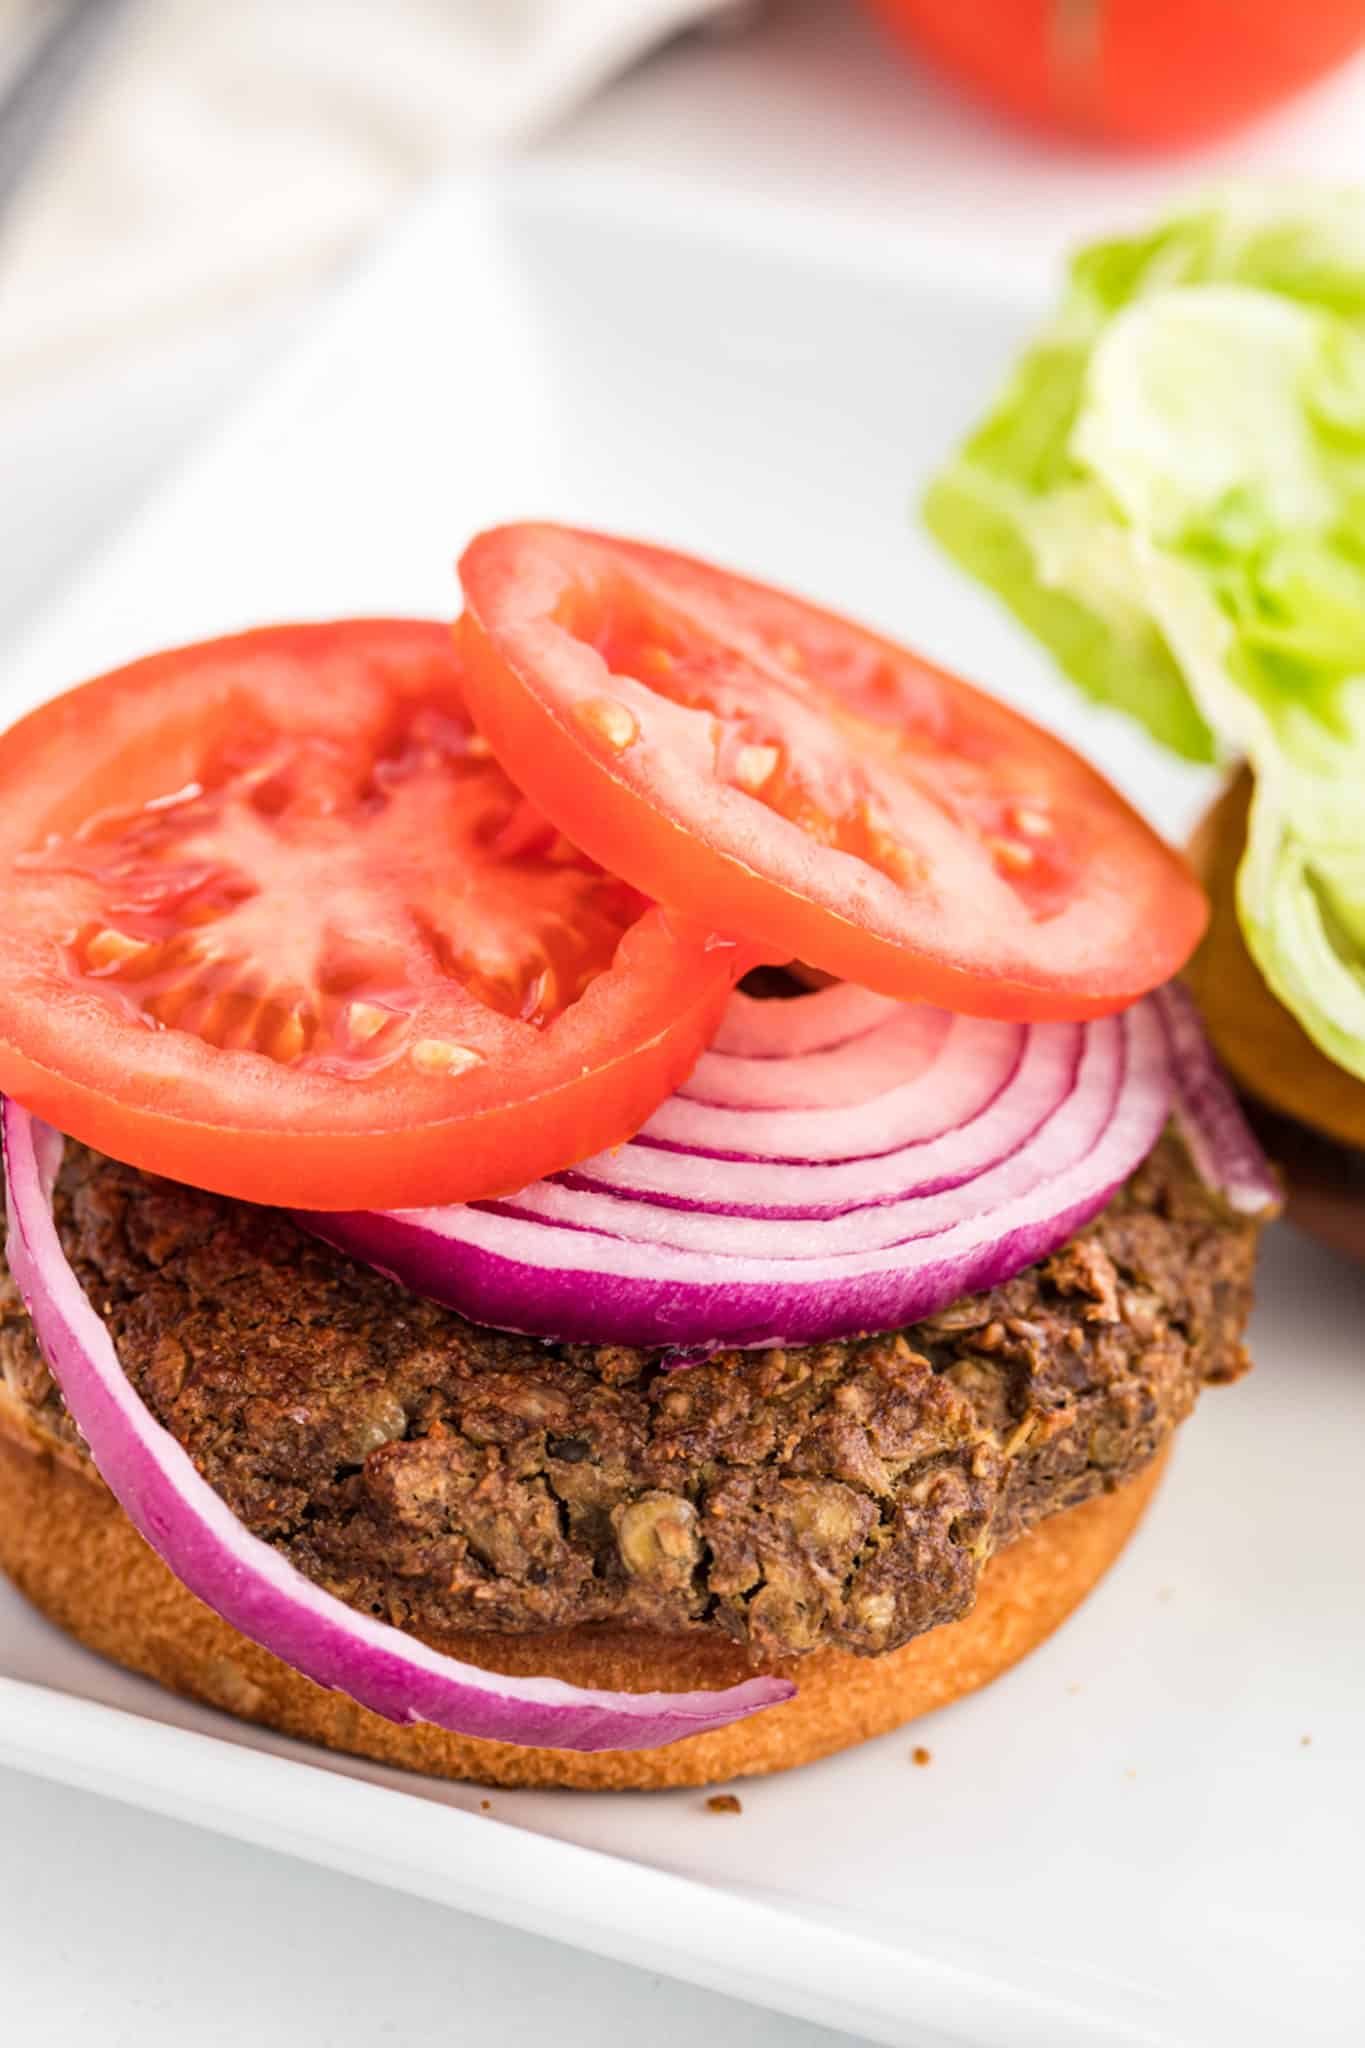 A lentil burger with onion and tomato